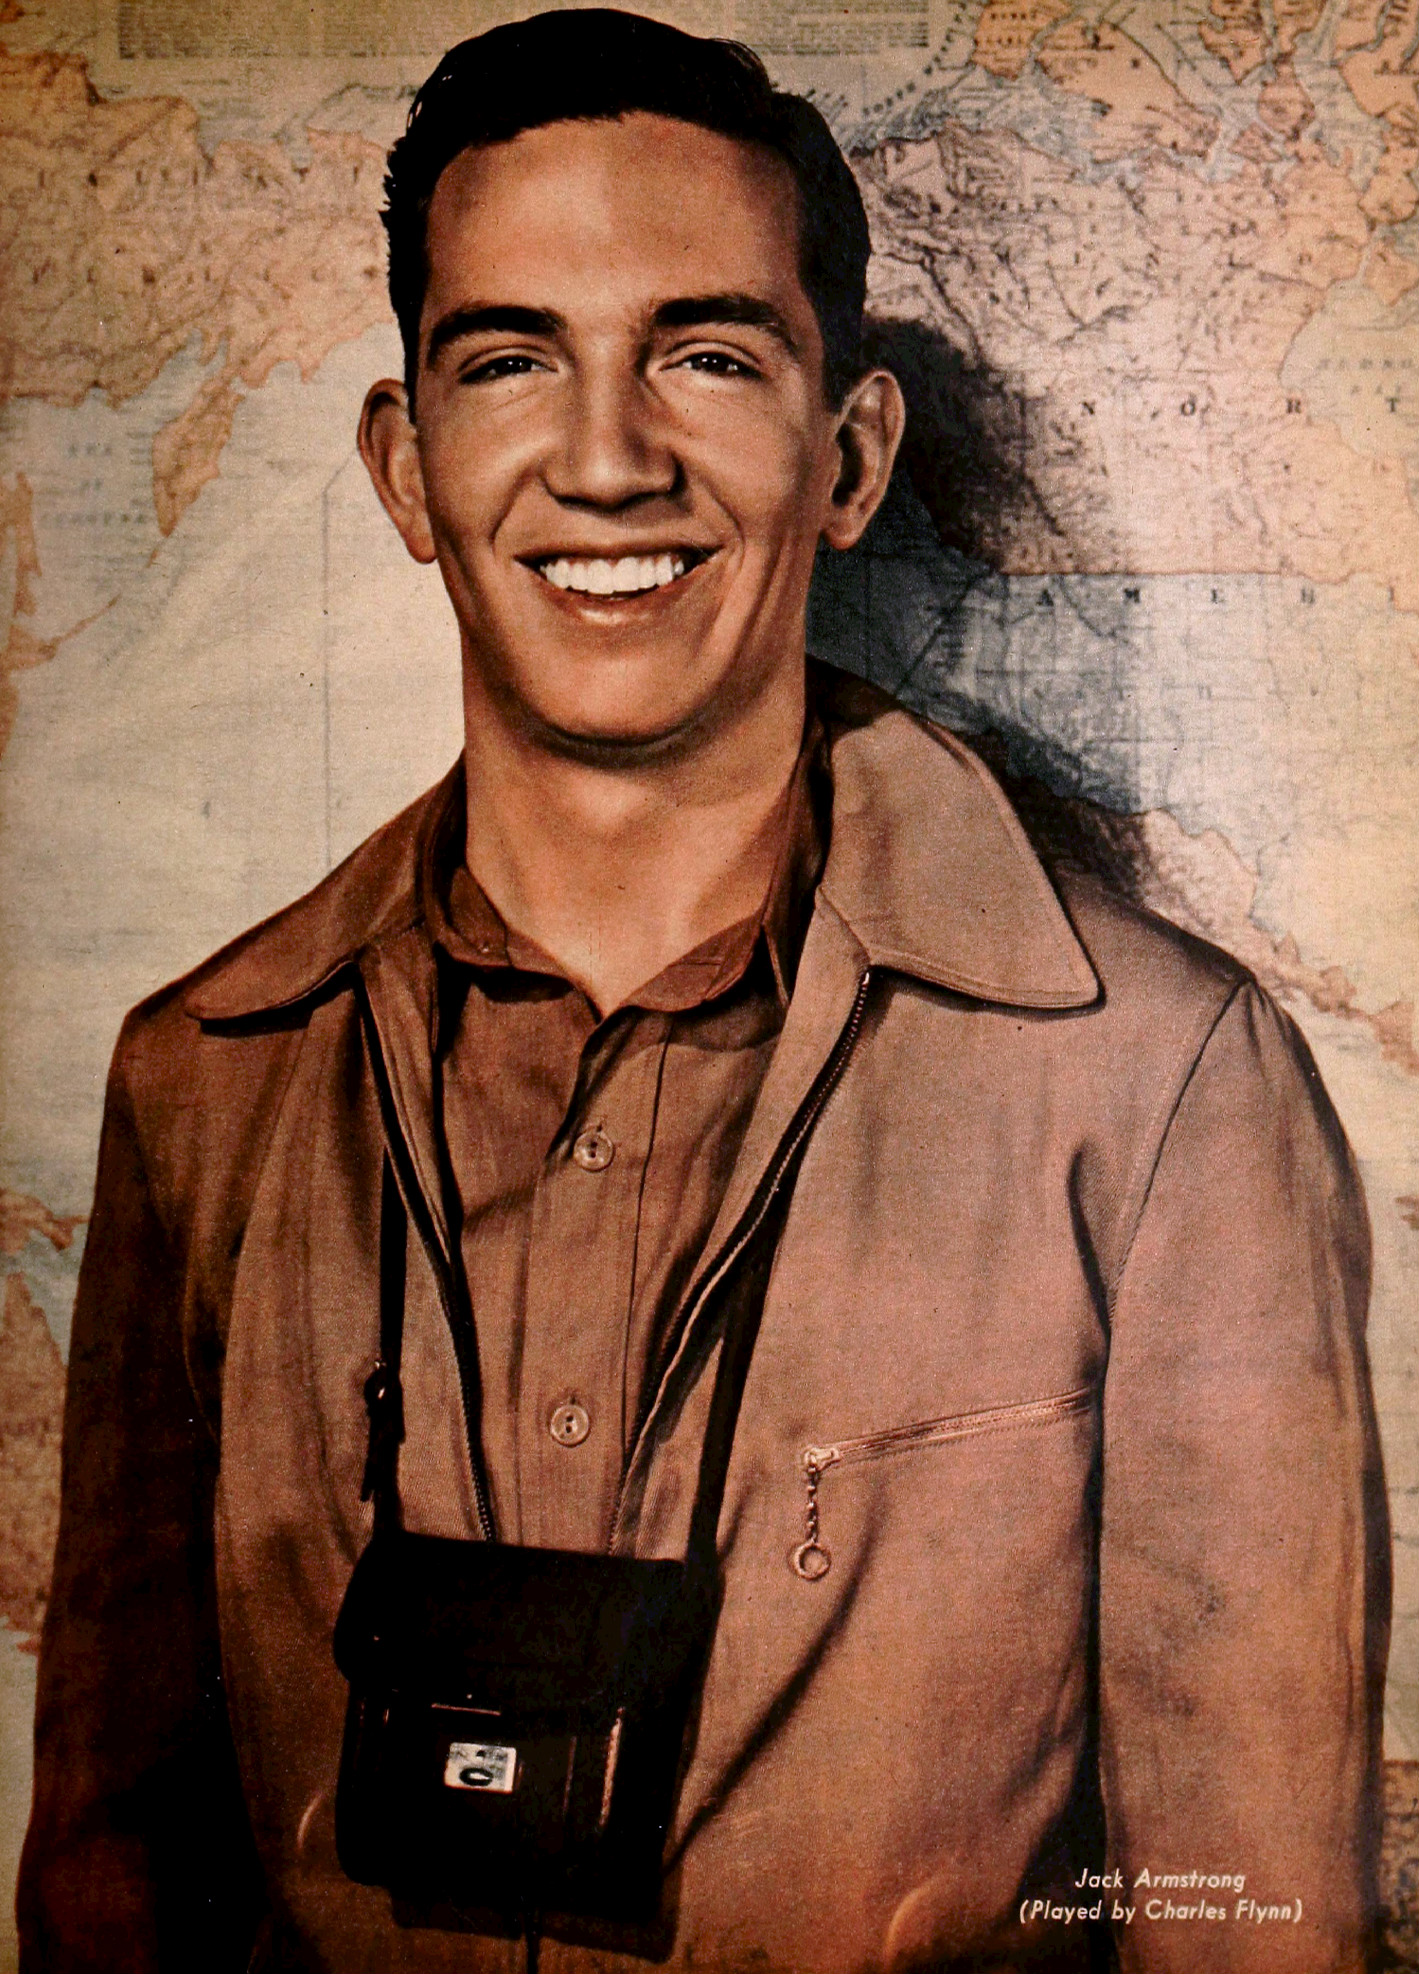 Charles Flynn as Jack Armstrong in 1943